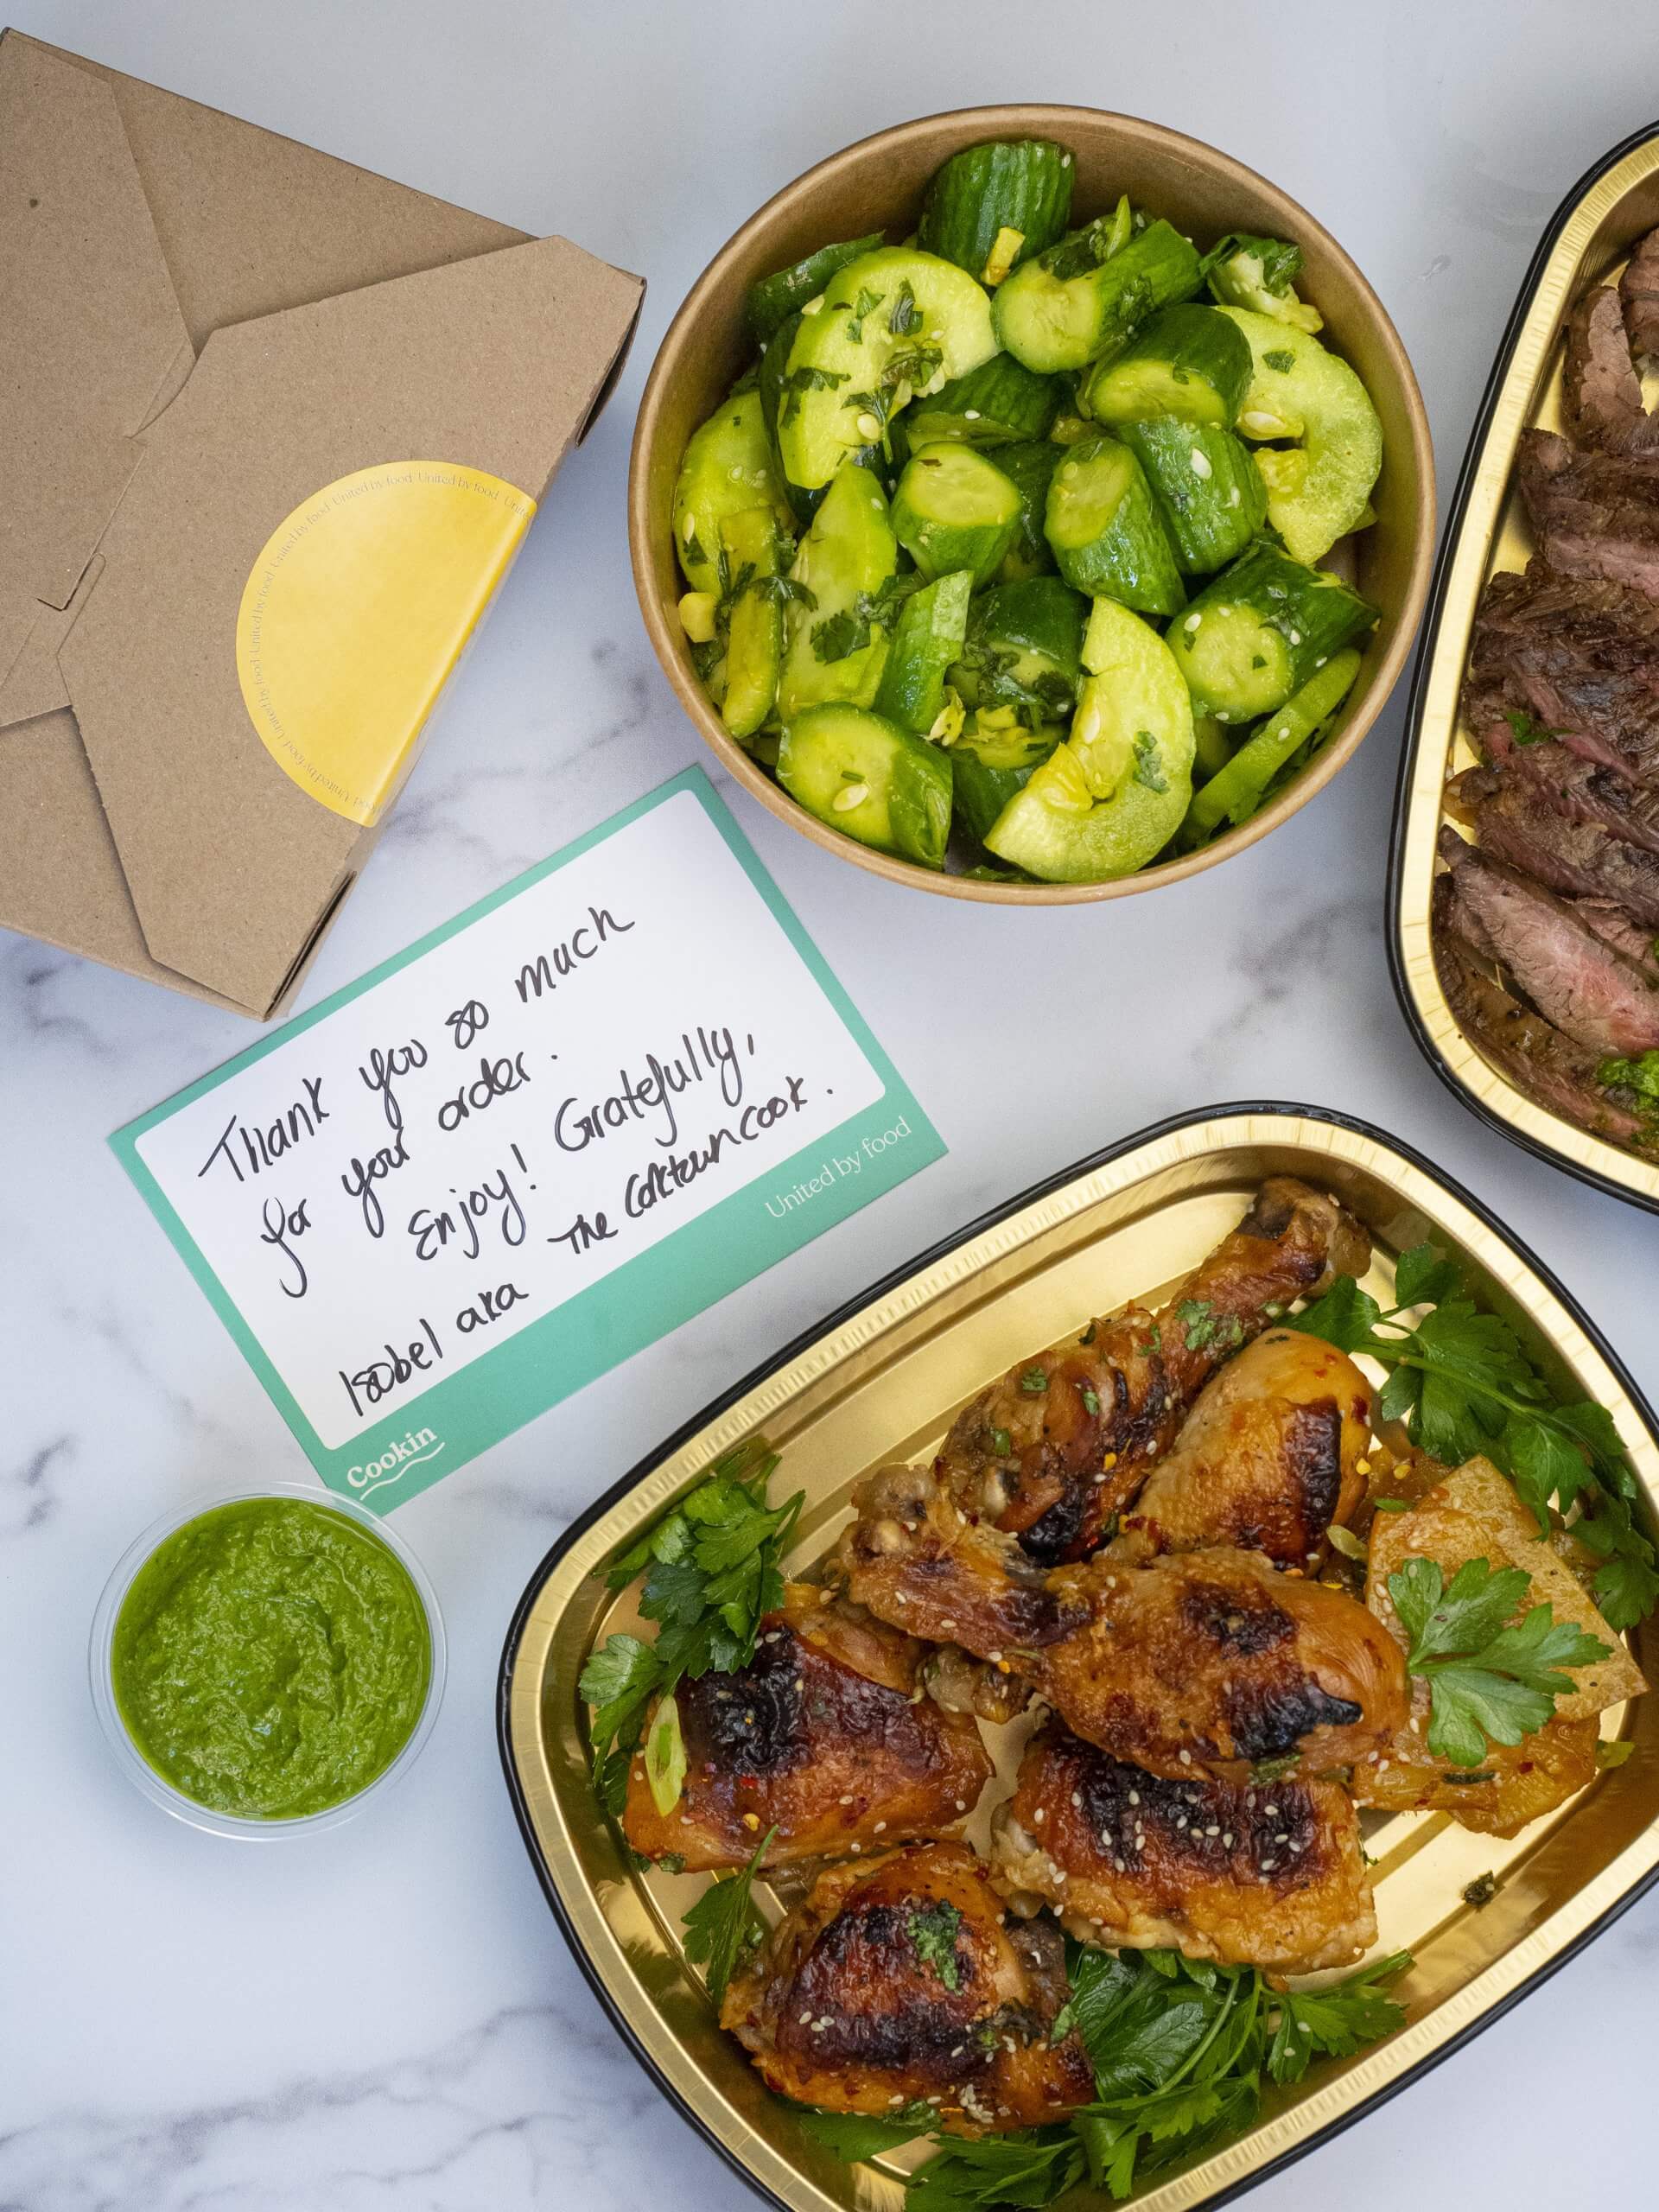 A handwritten note next to takeout containers